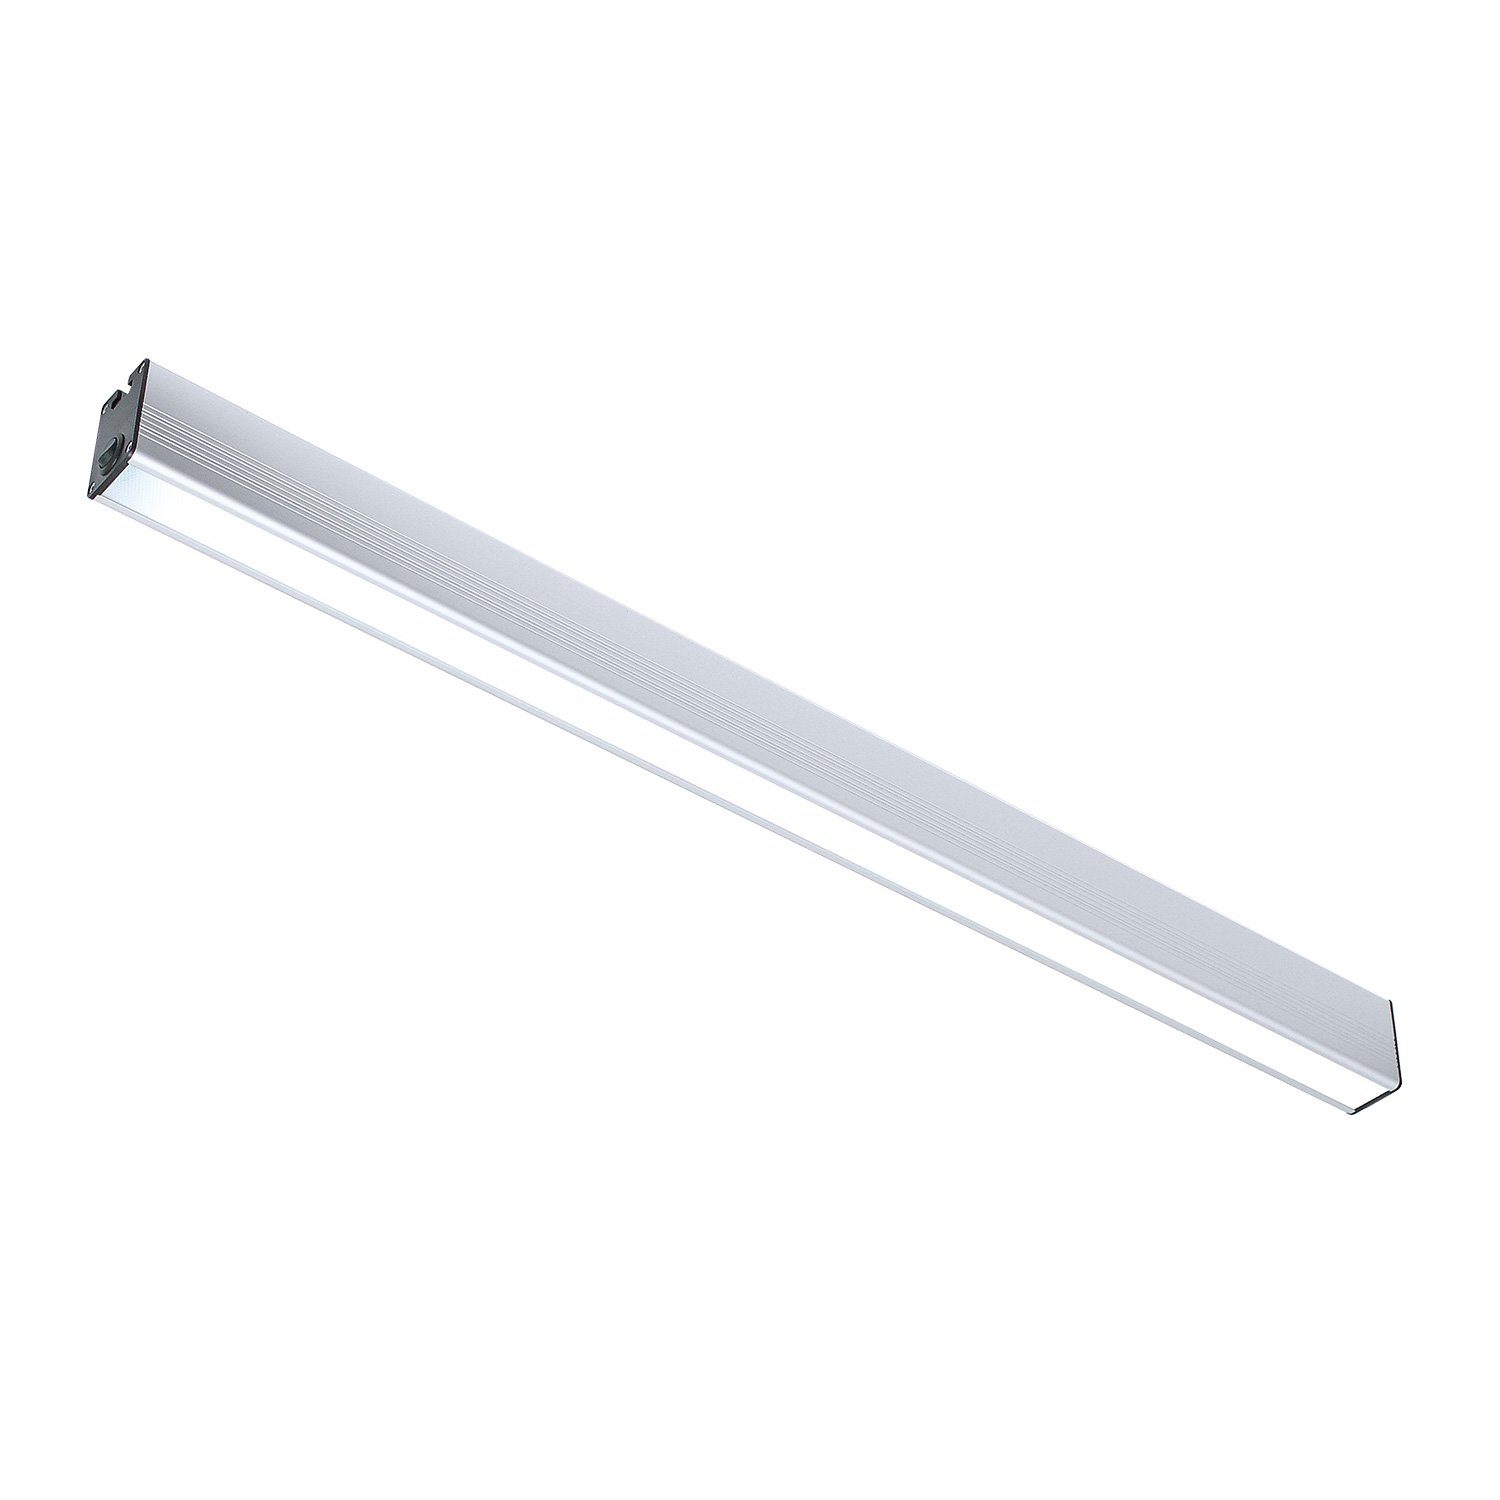 LED2WORK LED Arbeitsleuchte PROFILED AC, LED, Profilleuchte, mit T-Nut, Made in Germany | Arbeitsleuchten